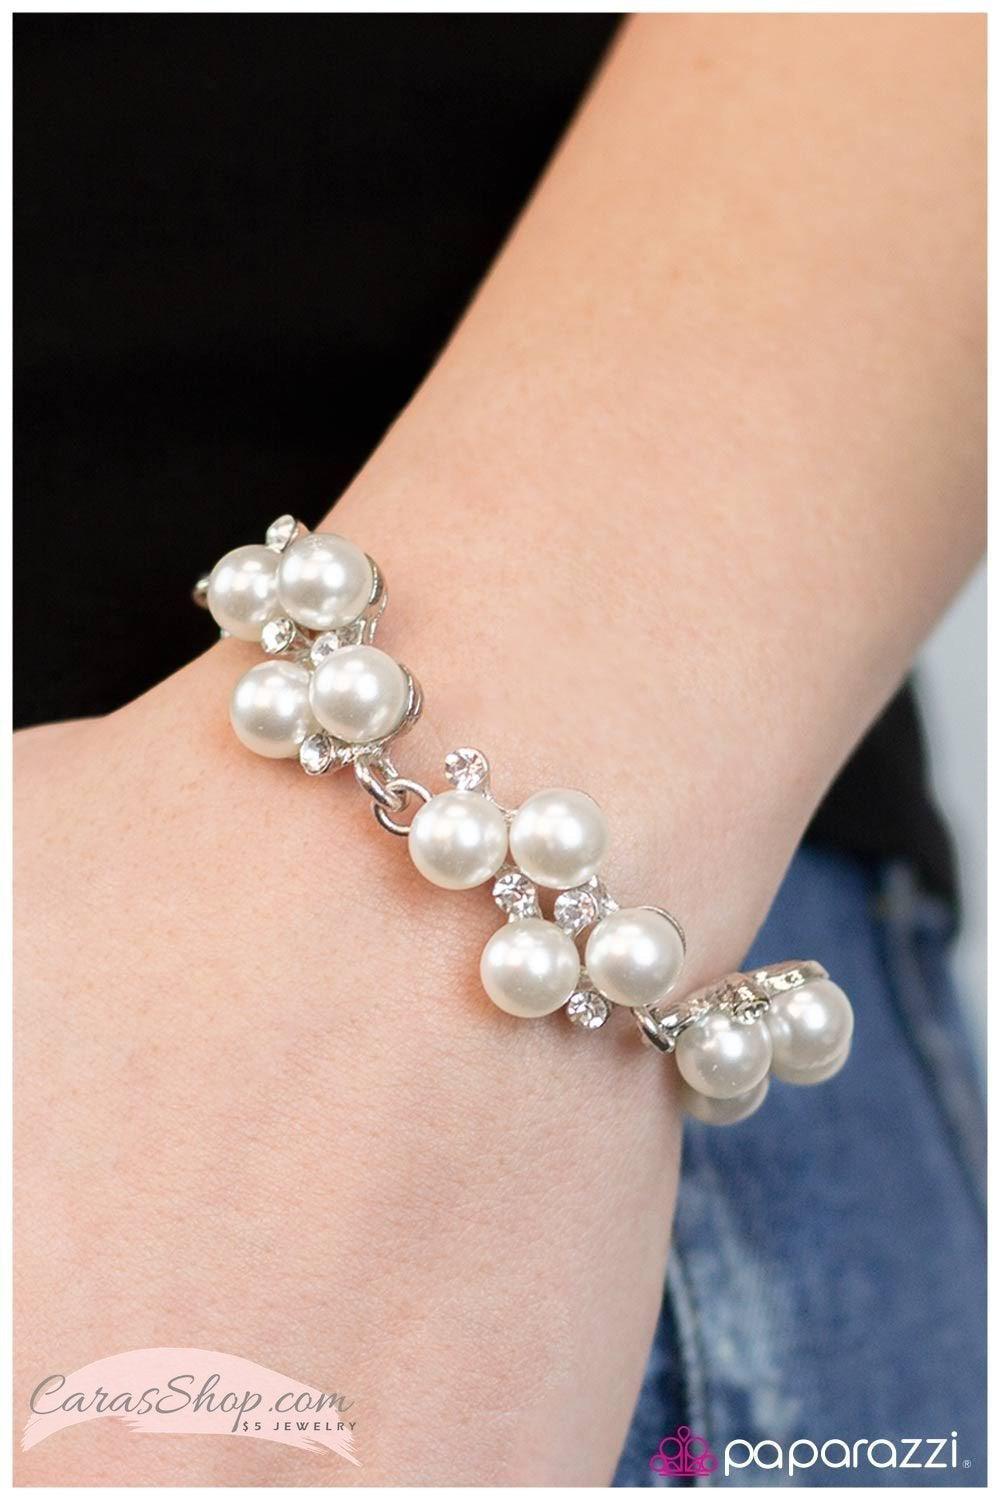 I Do - White Pearl Bracelet - Paparazzi Accessories - Blockbuster - best seller - CarasShop.com - $5 Jewelry by Cara Jewels